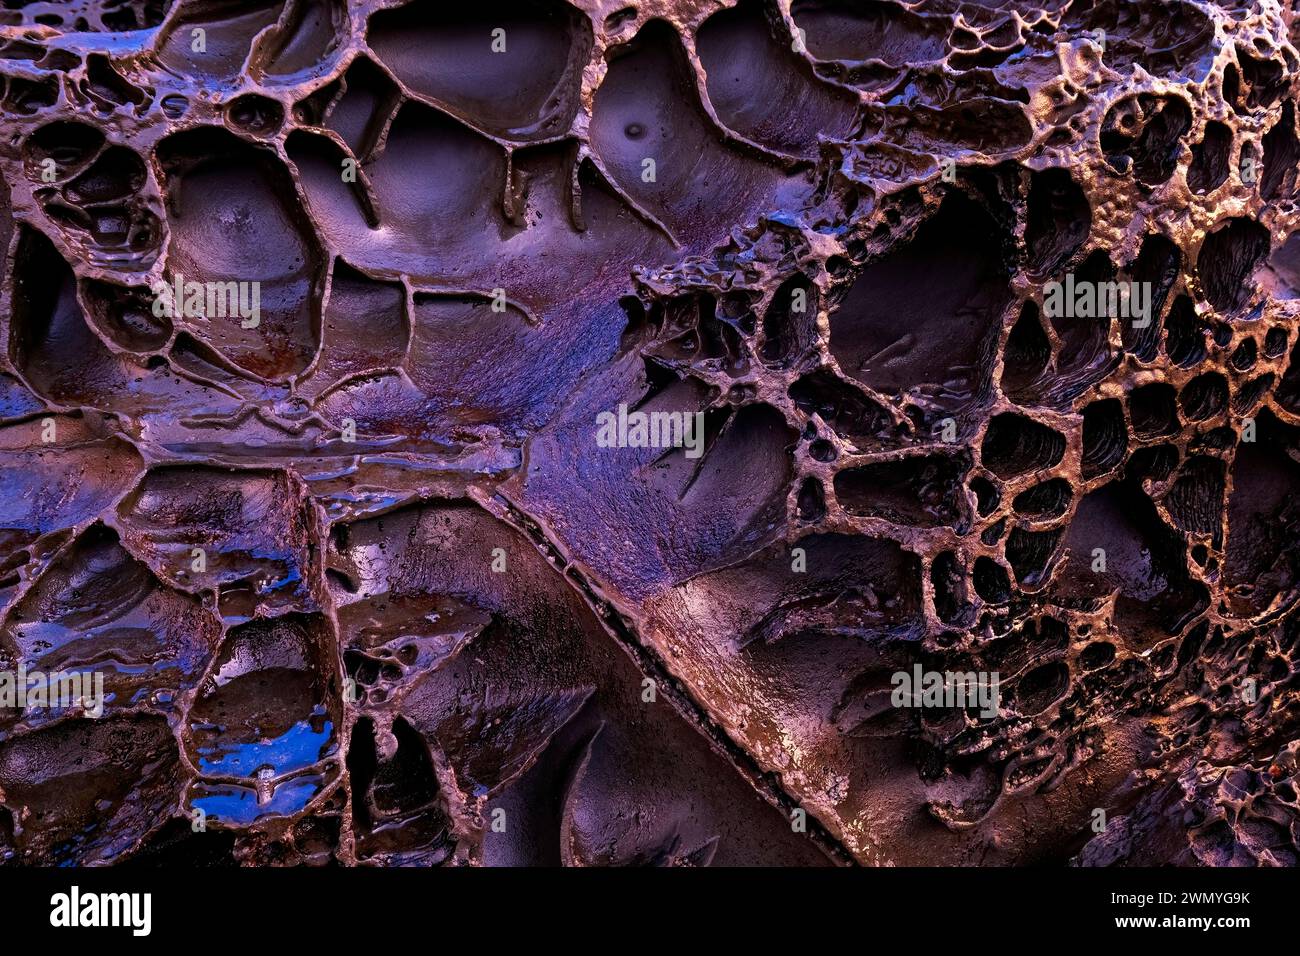 This image features close-up textures of biogenic rock formations due to biofilm bacteria found in iron-rich areas at Llumeres beach in Asturias. Stock Photo